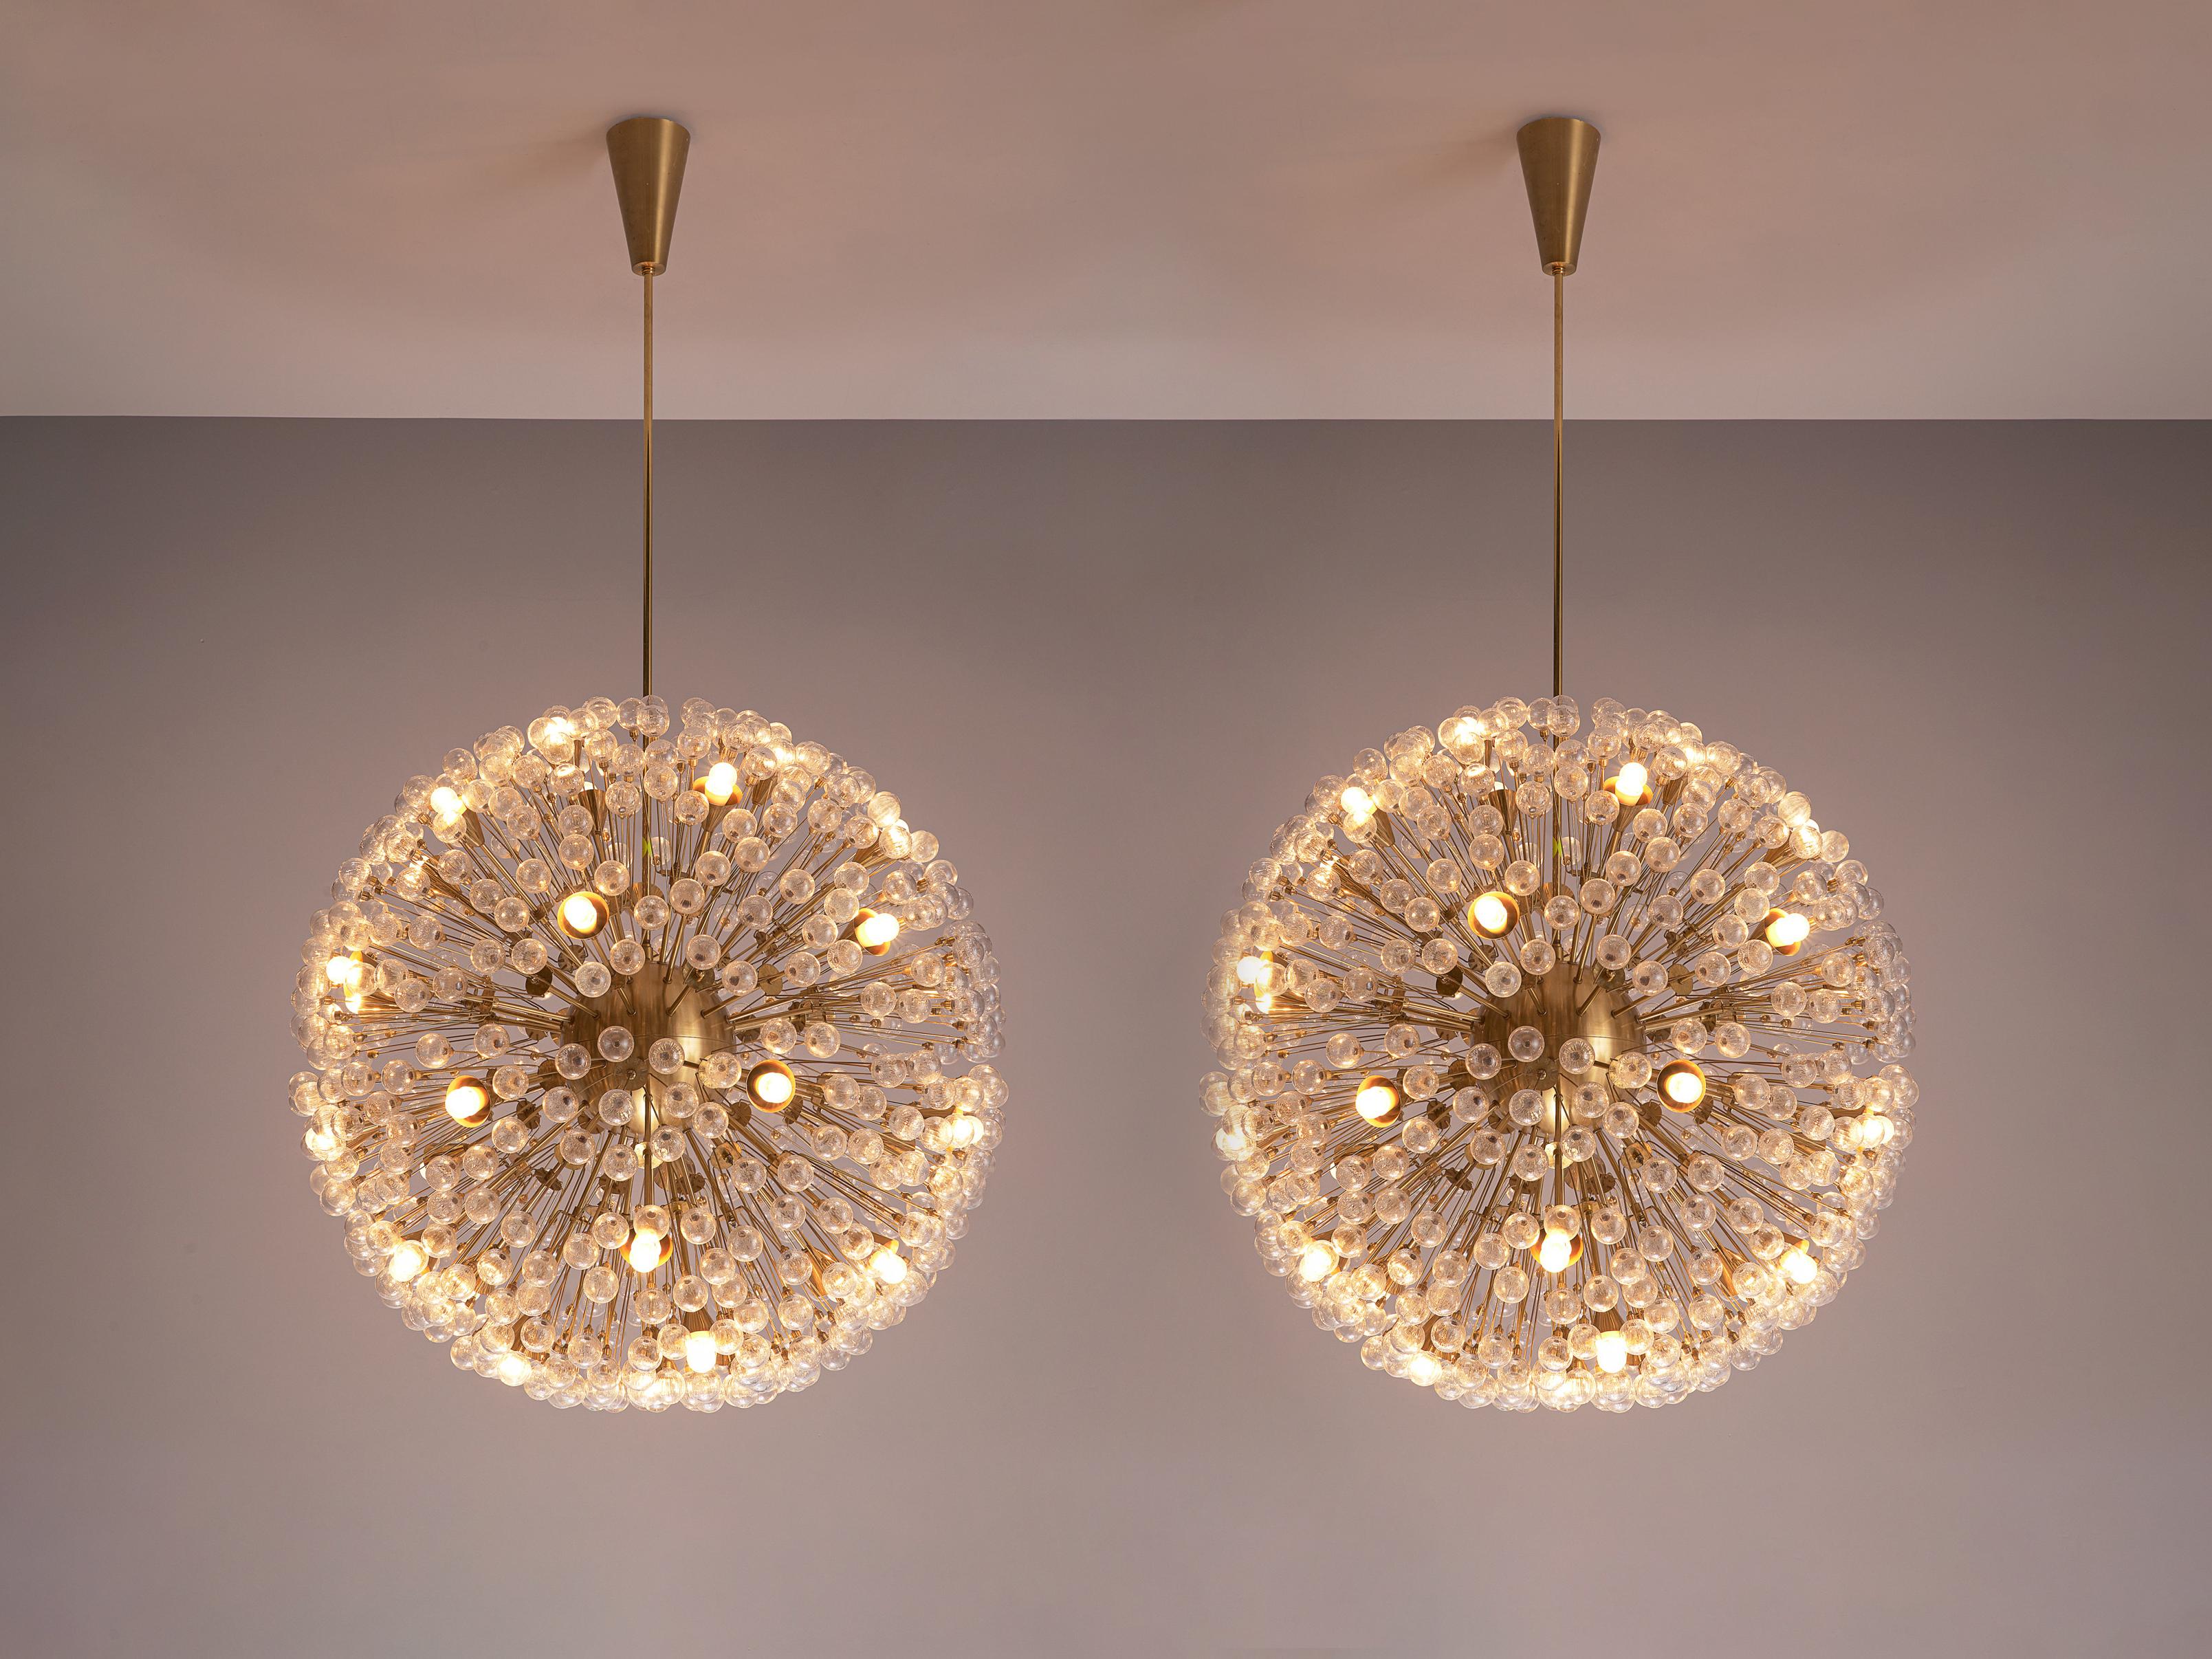 'Sputnik' chandeliers, brass, glass, Austria, 1960s

Beautiful and sizeable 'Sputnik' chandelier made in Austria in the 1960s. This light consist of a center sphere from which many rods with glass spheres at each end are held. The small spheres are